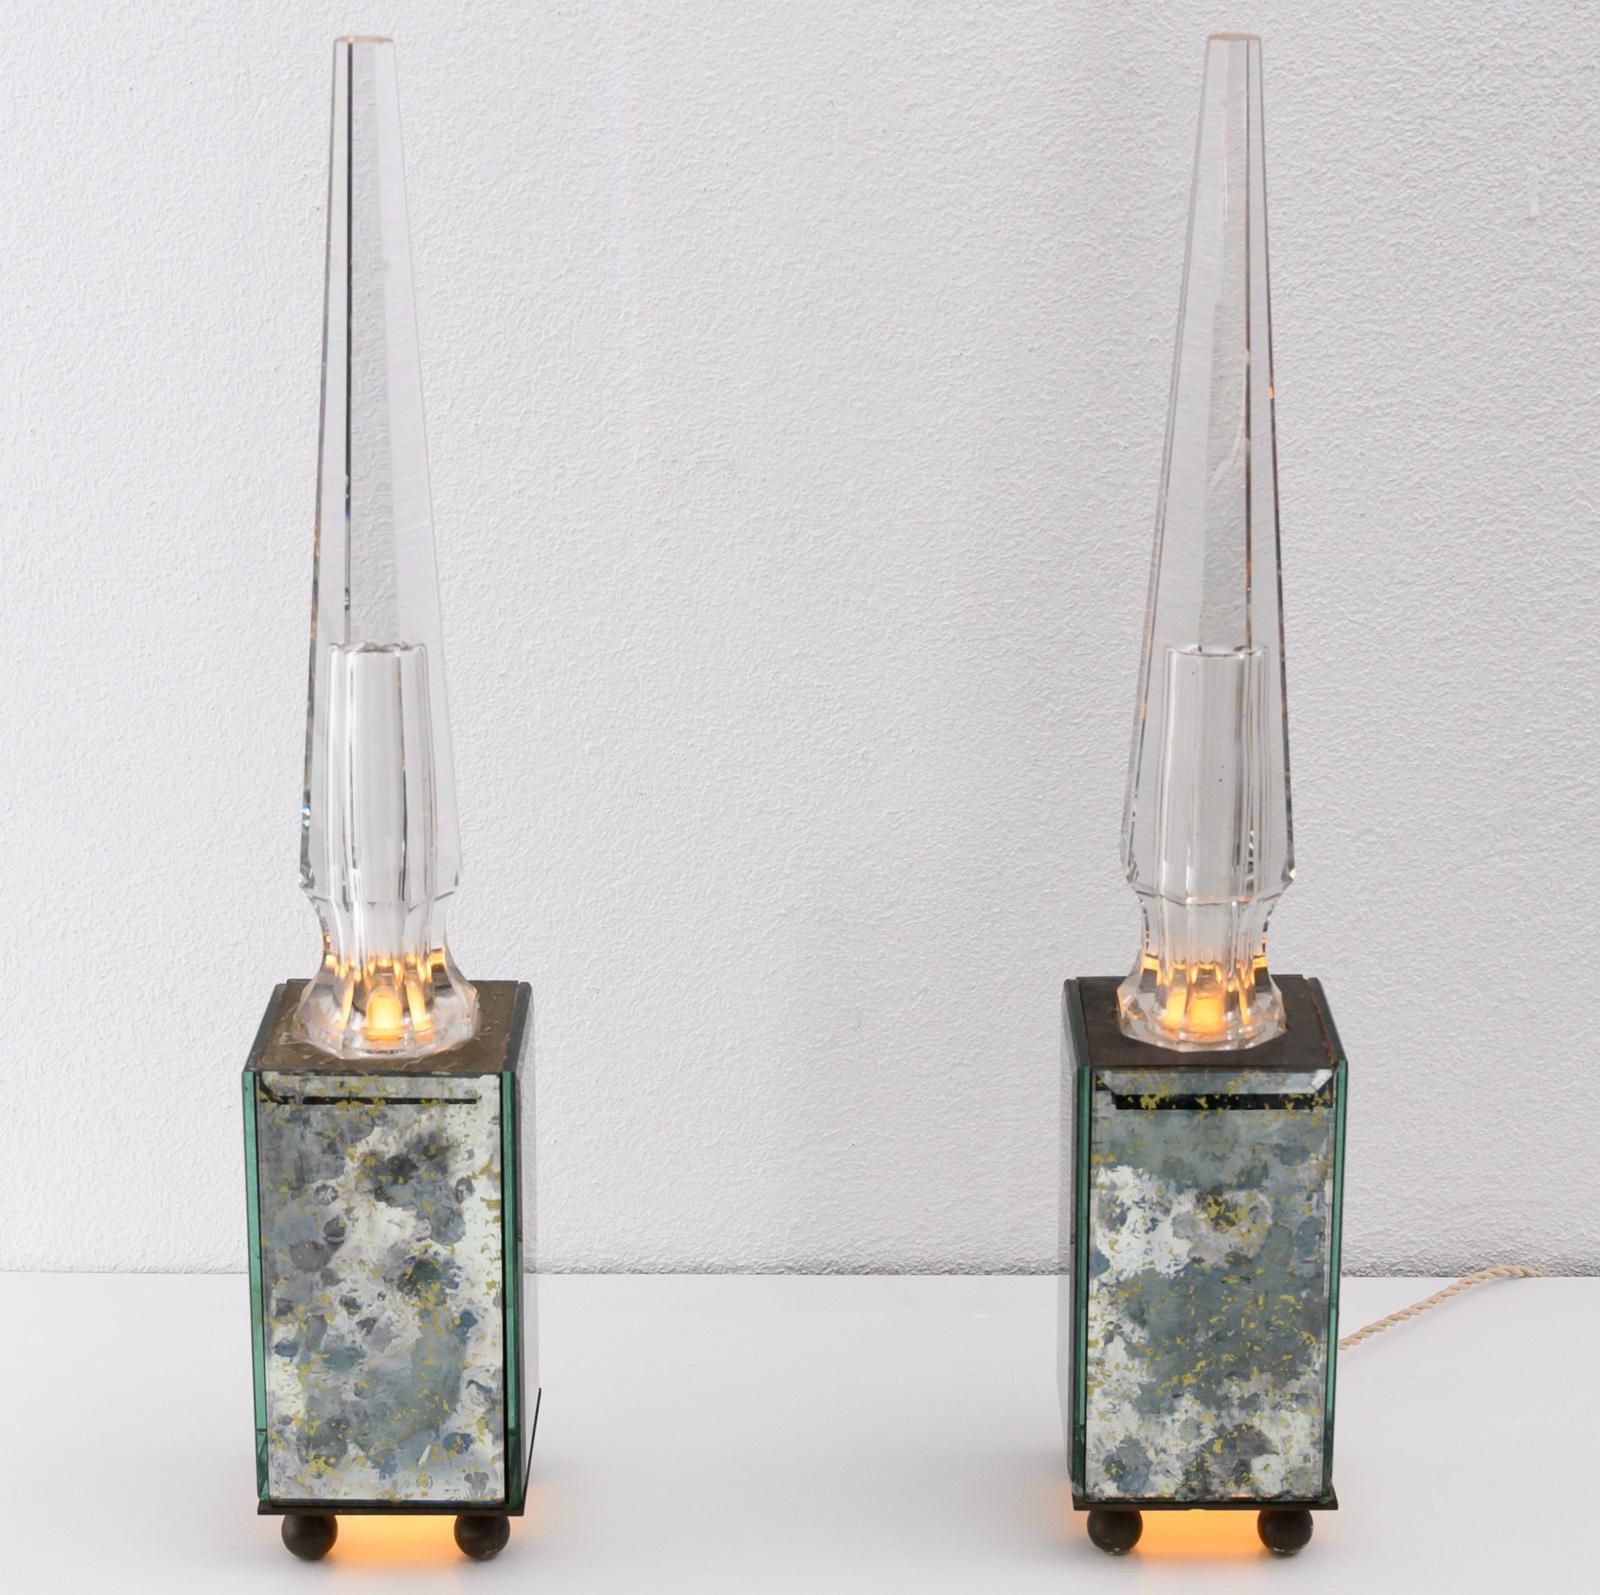 Mid-20th Century Pair of Obelisk Lamps in the Style of Serge Roche, France circa 1940